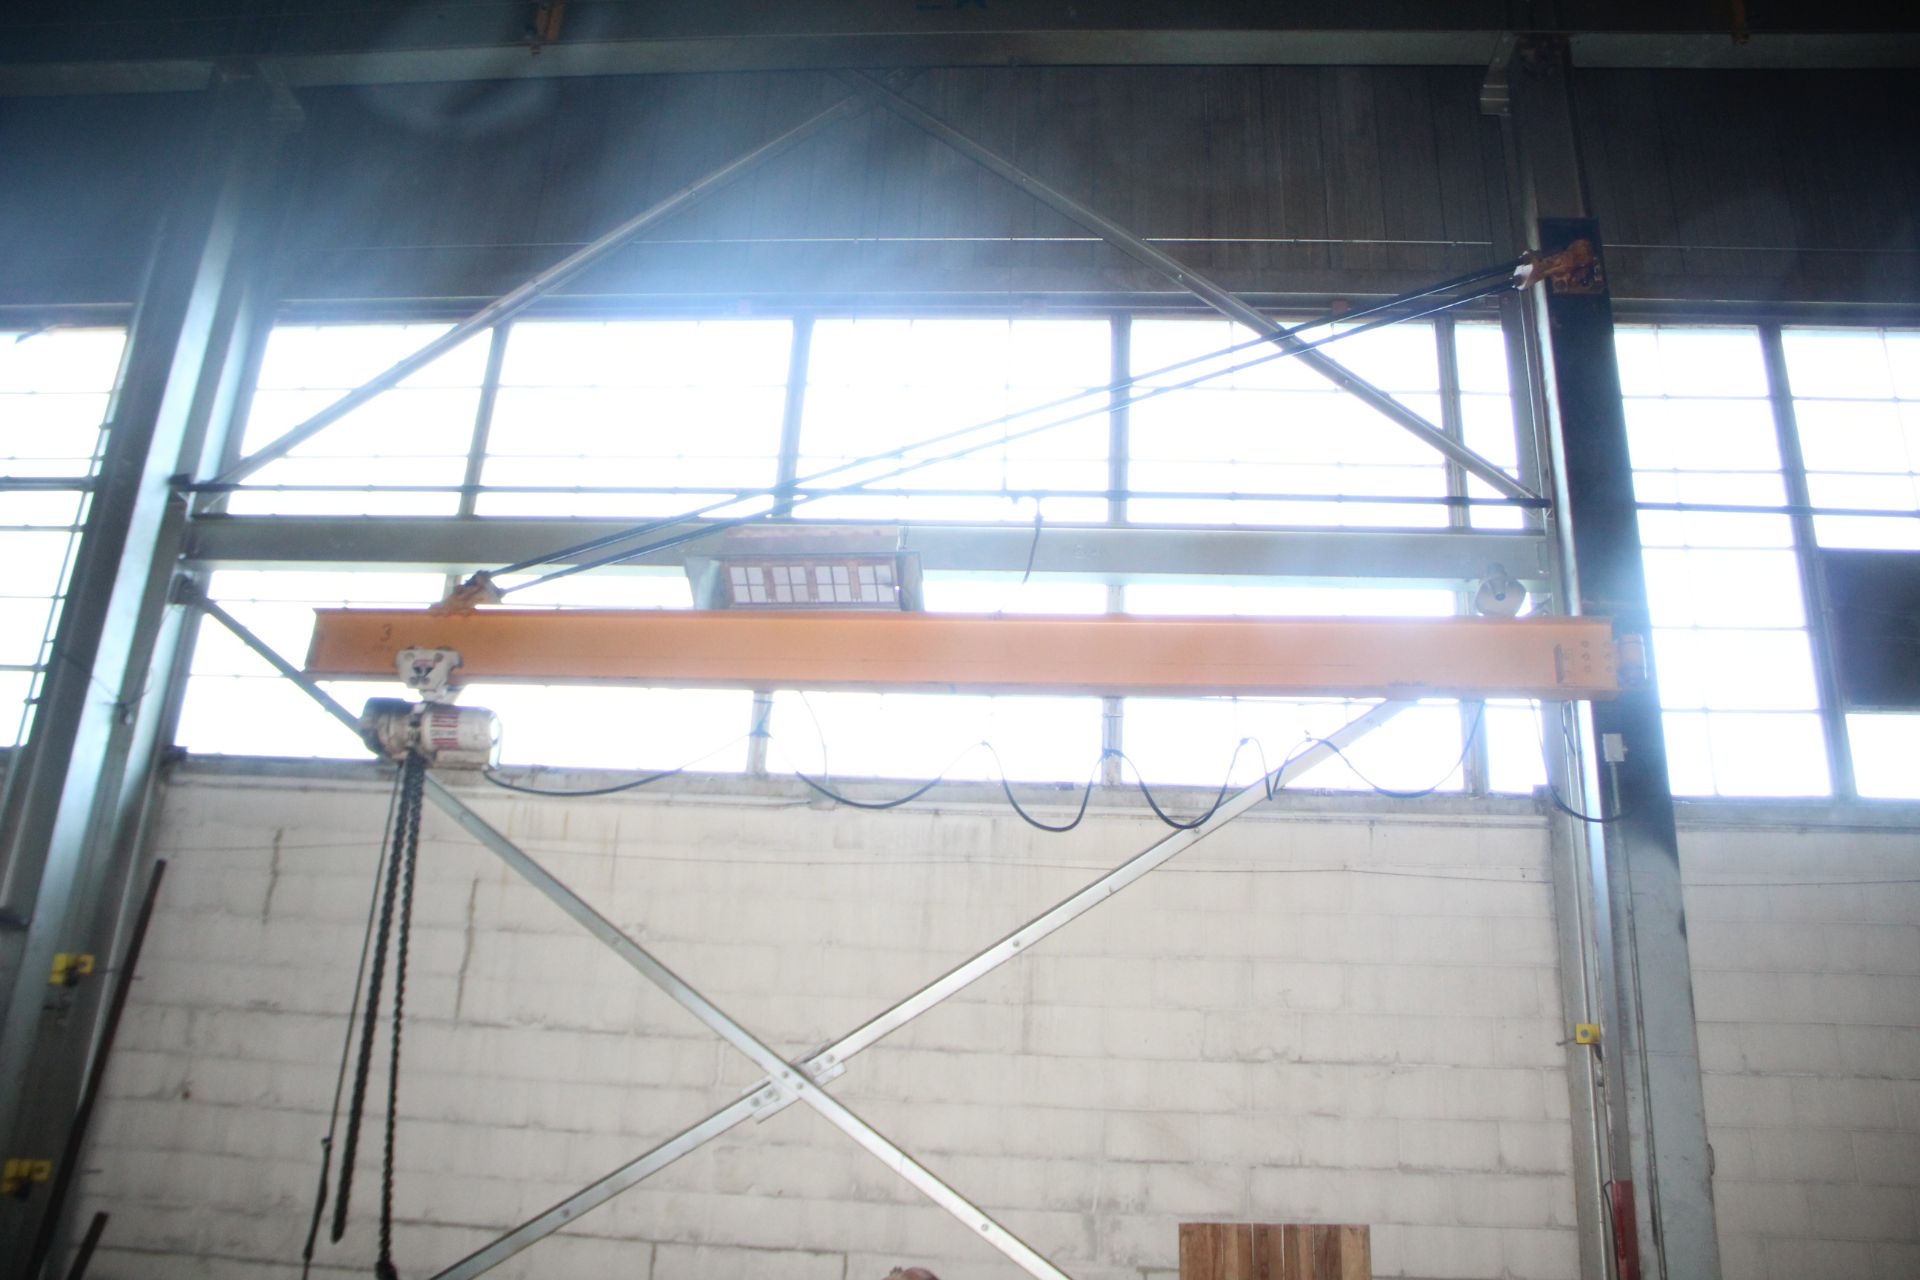 17' JIB ARM WITH COFFING 3 TON ELECTRIC HOIST, ATTACHED PENDANT CONTROL